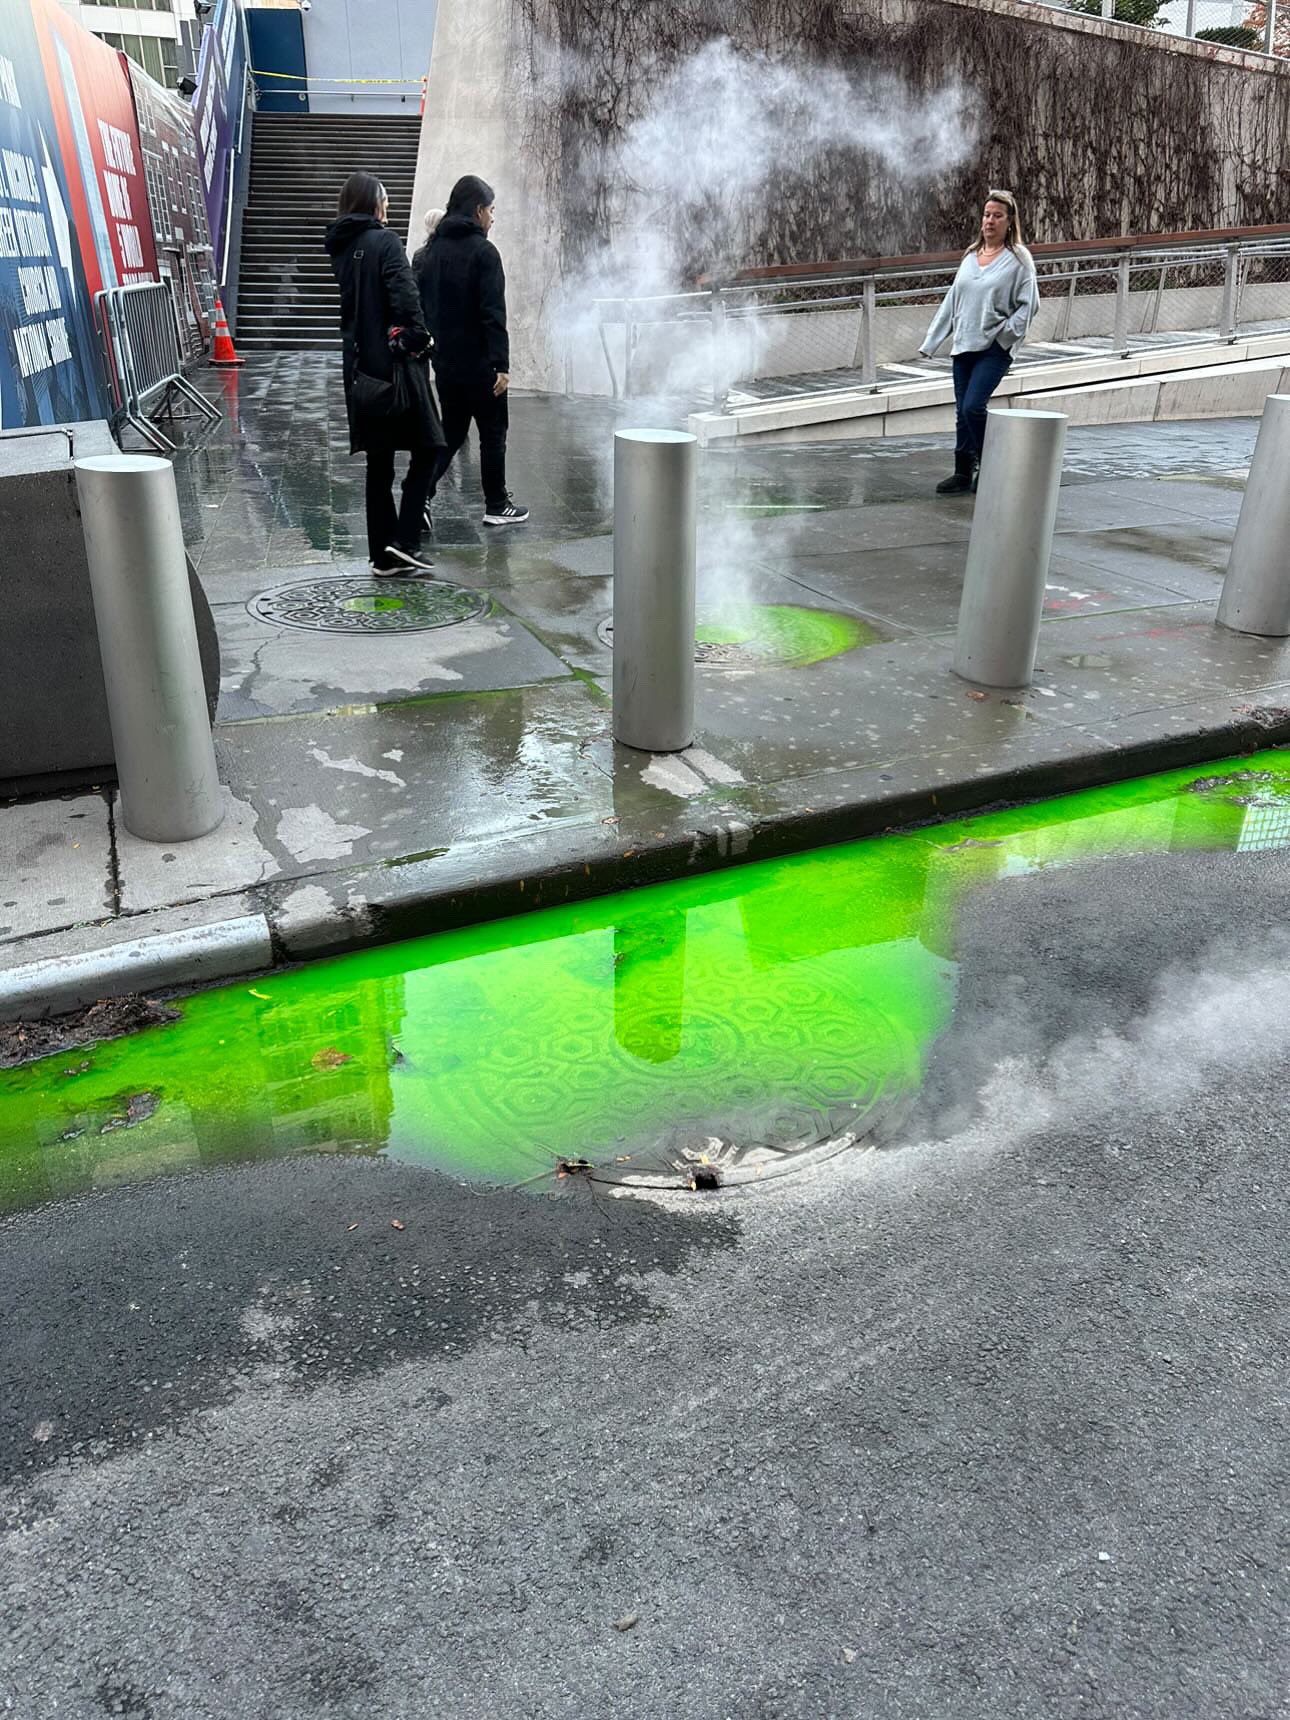 Watch: Green Liquid Spews Out Of Sewers In New York City